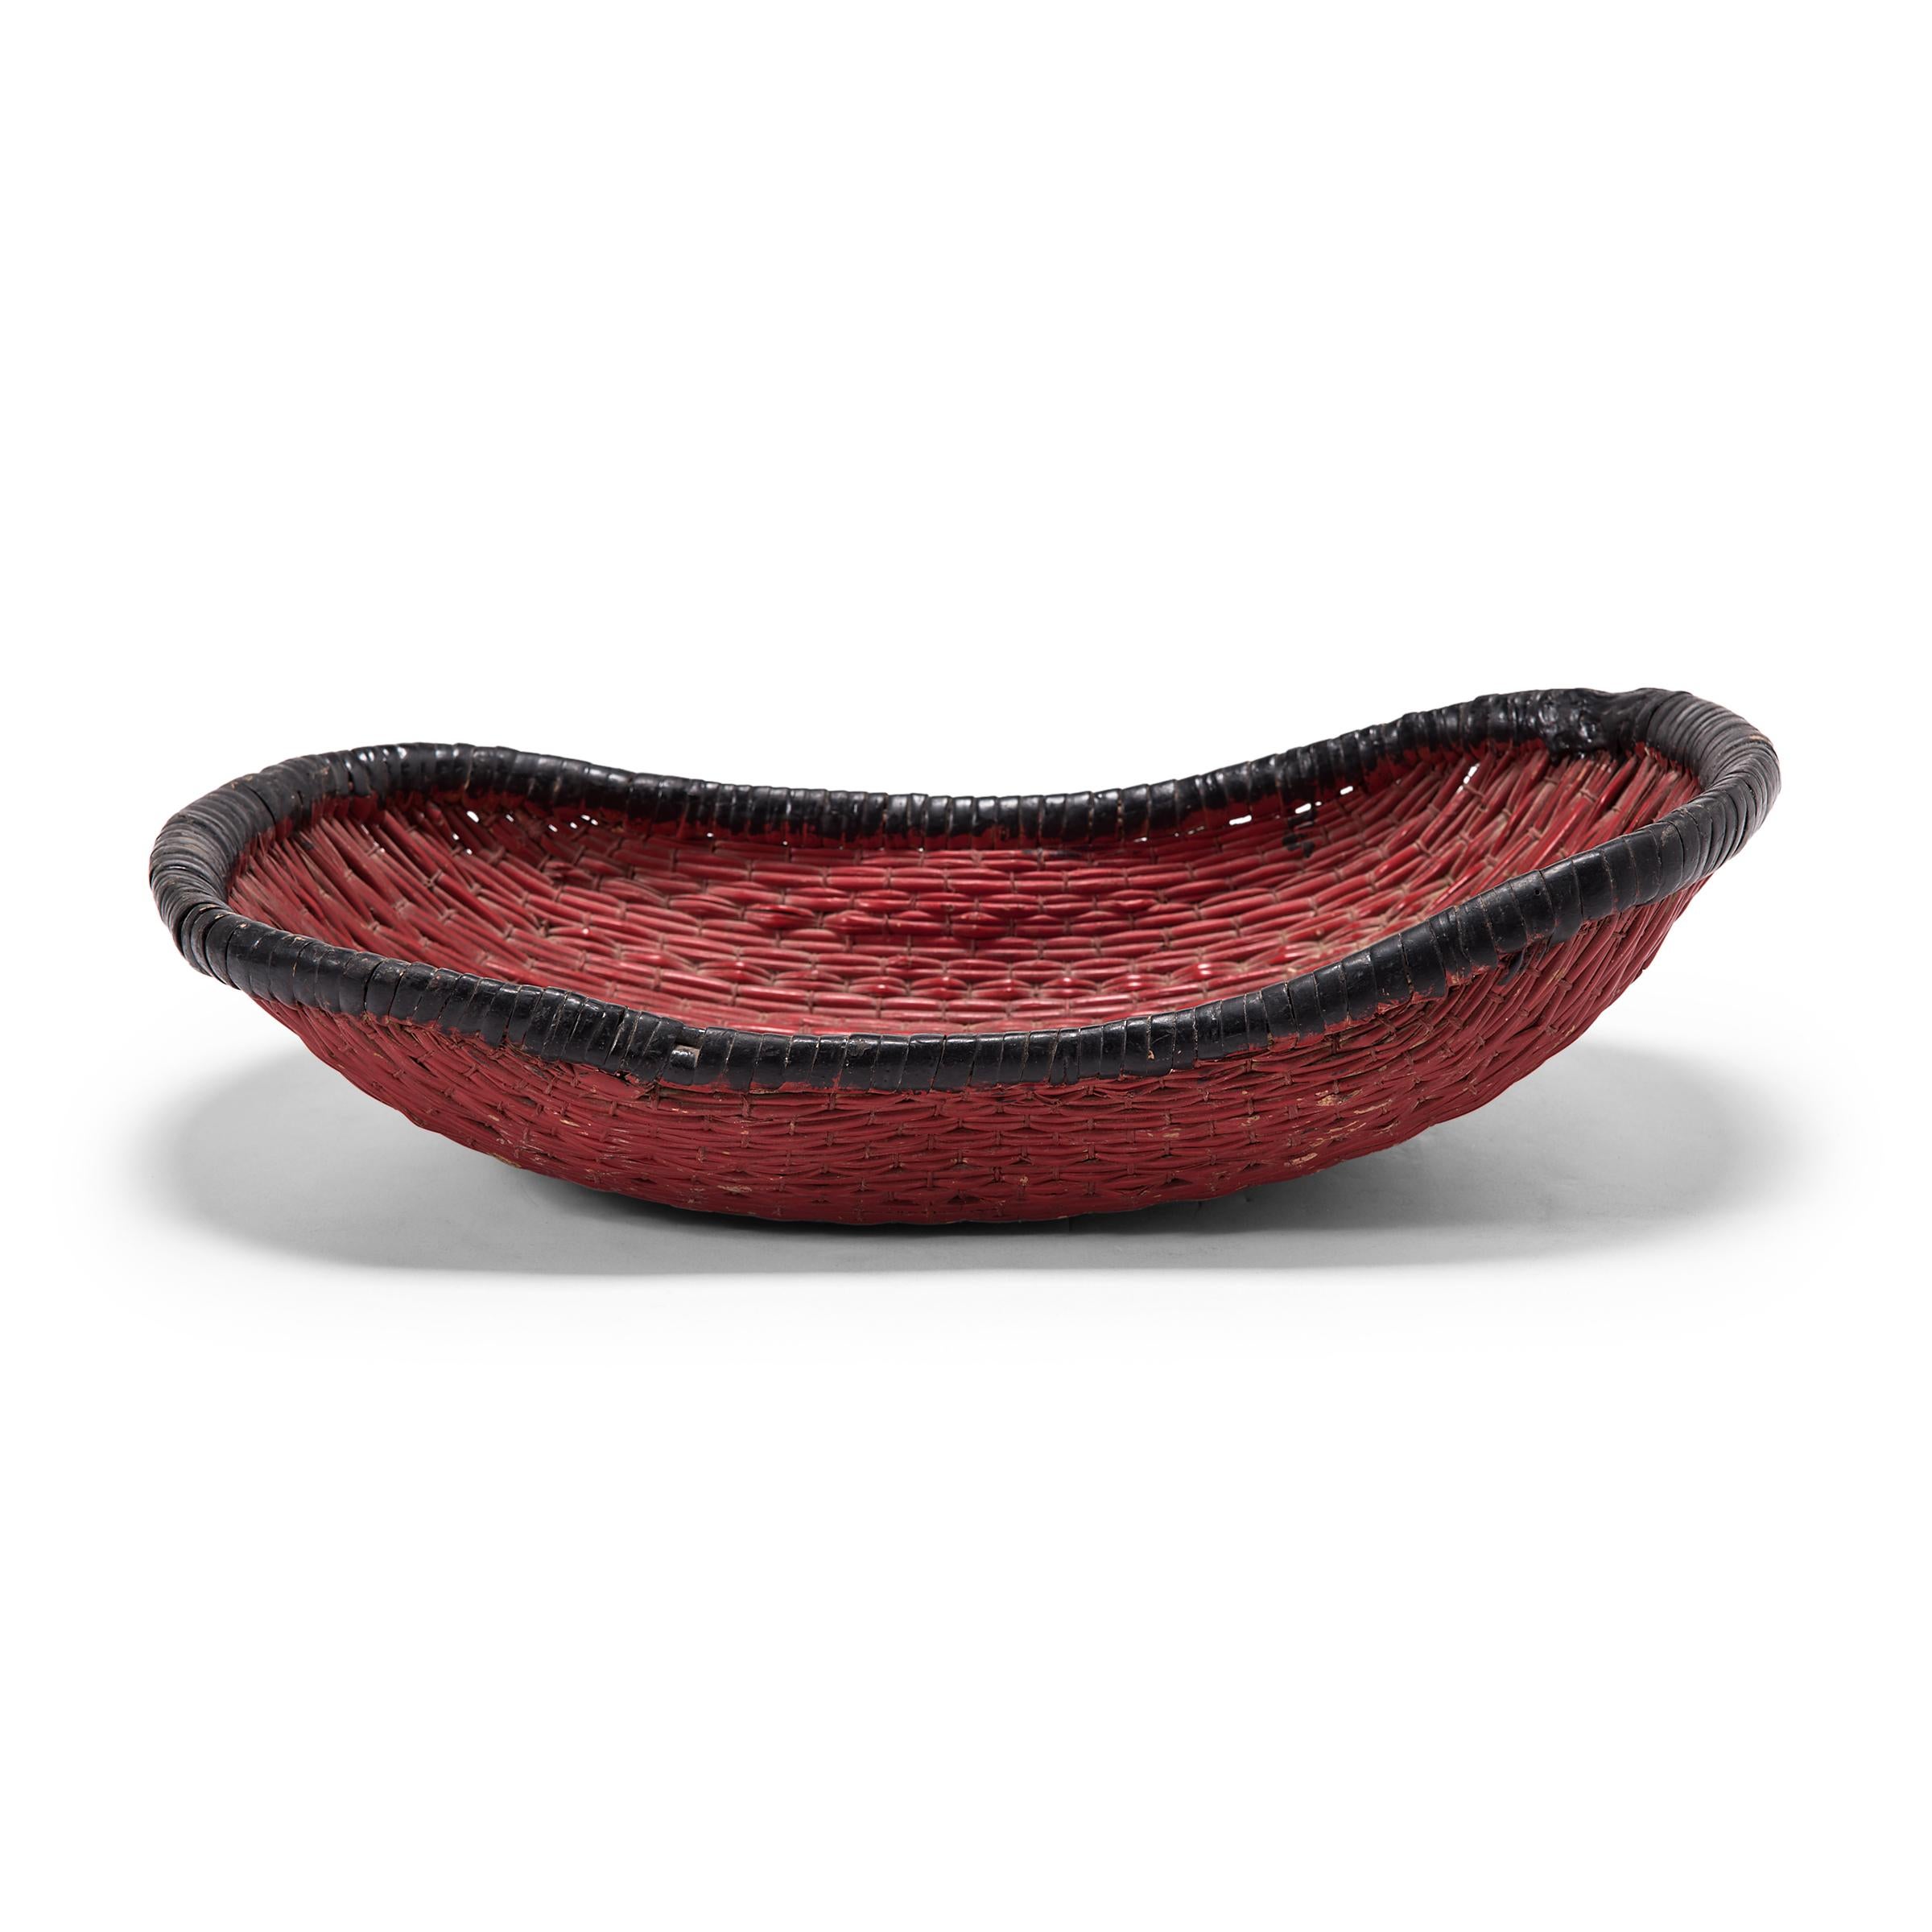 Woven with a delightfully unusual form, this early 20th century basket was originally used to steam mantou buns in a Provincial home in Shanxi province. The boat-shaped basket is formed of willow reeds entwined with a plain weave, and has since been